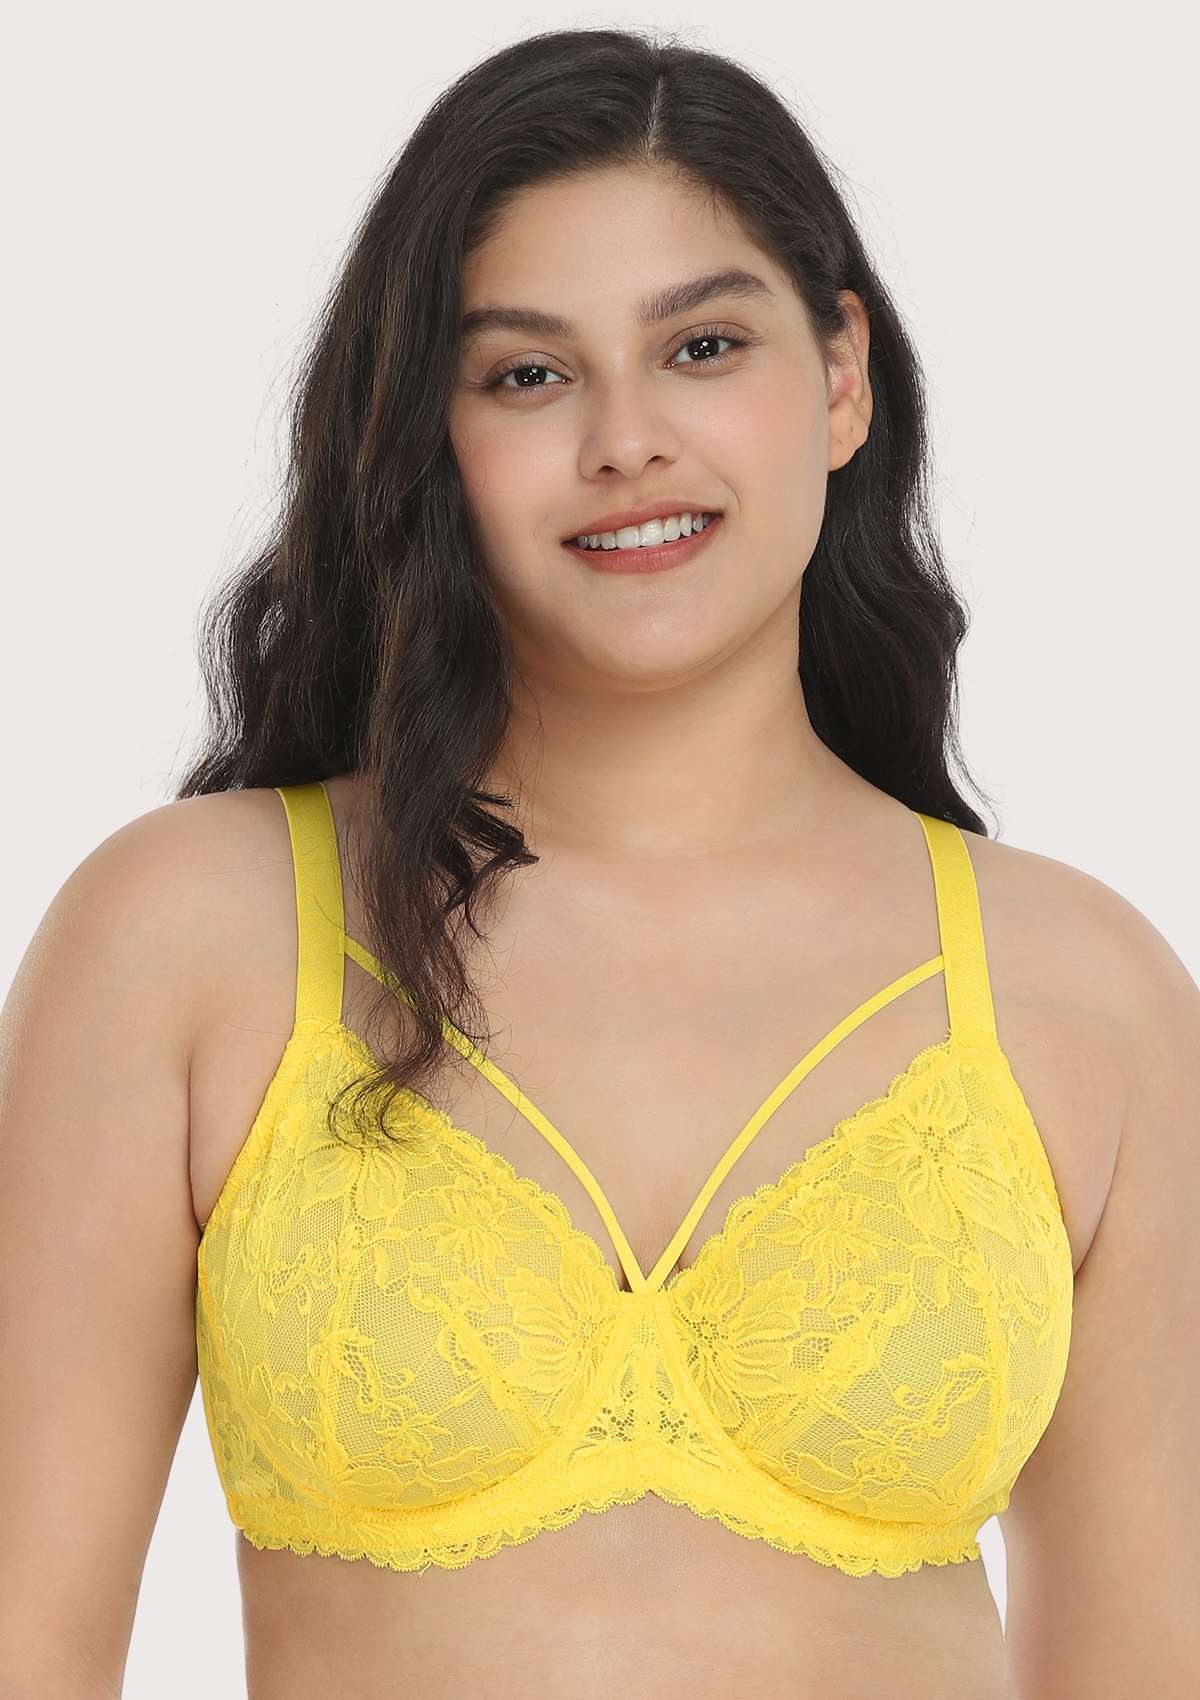 HSIA Unlined Lace Mesh Minimizer Bra For Large Breasts, Full Coverage - Bright Green / 34 / D